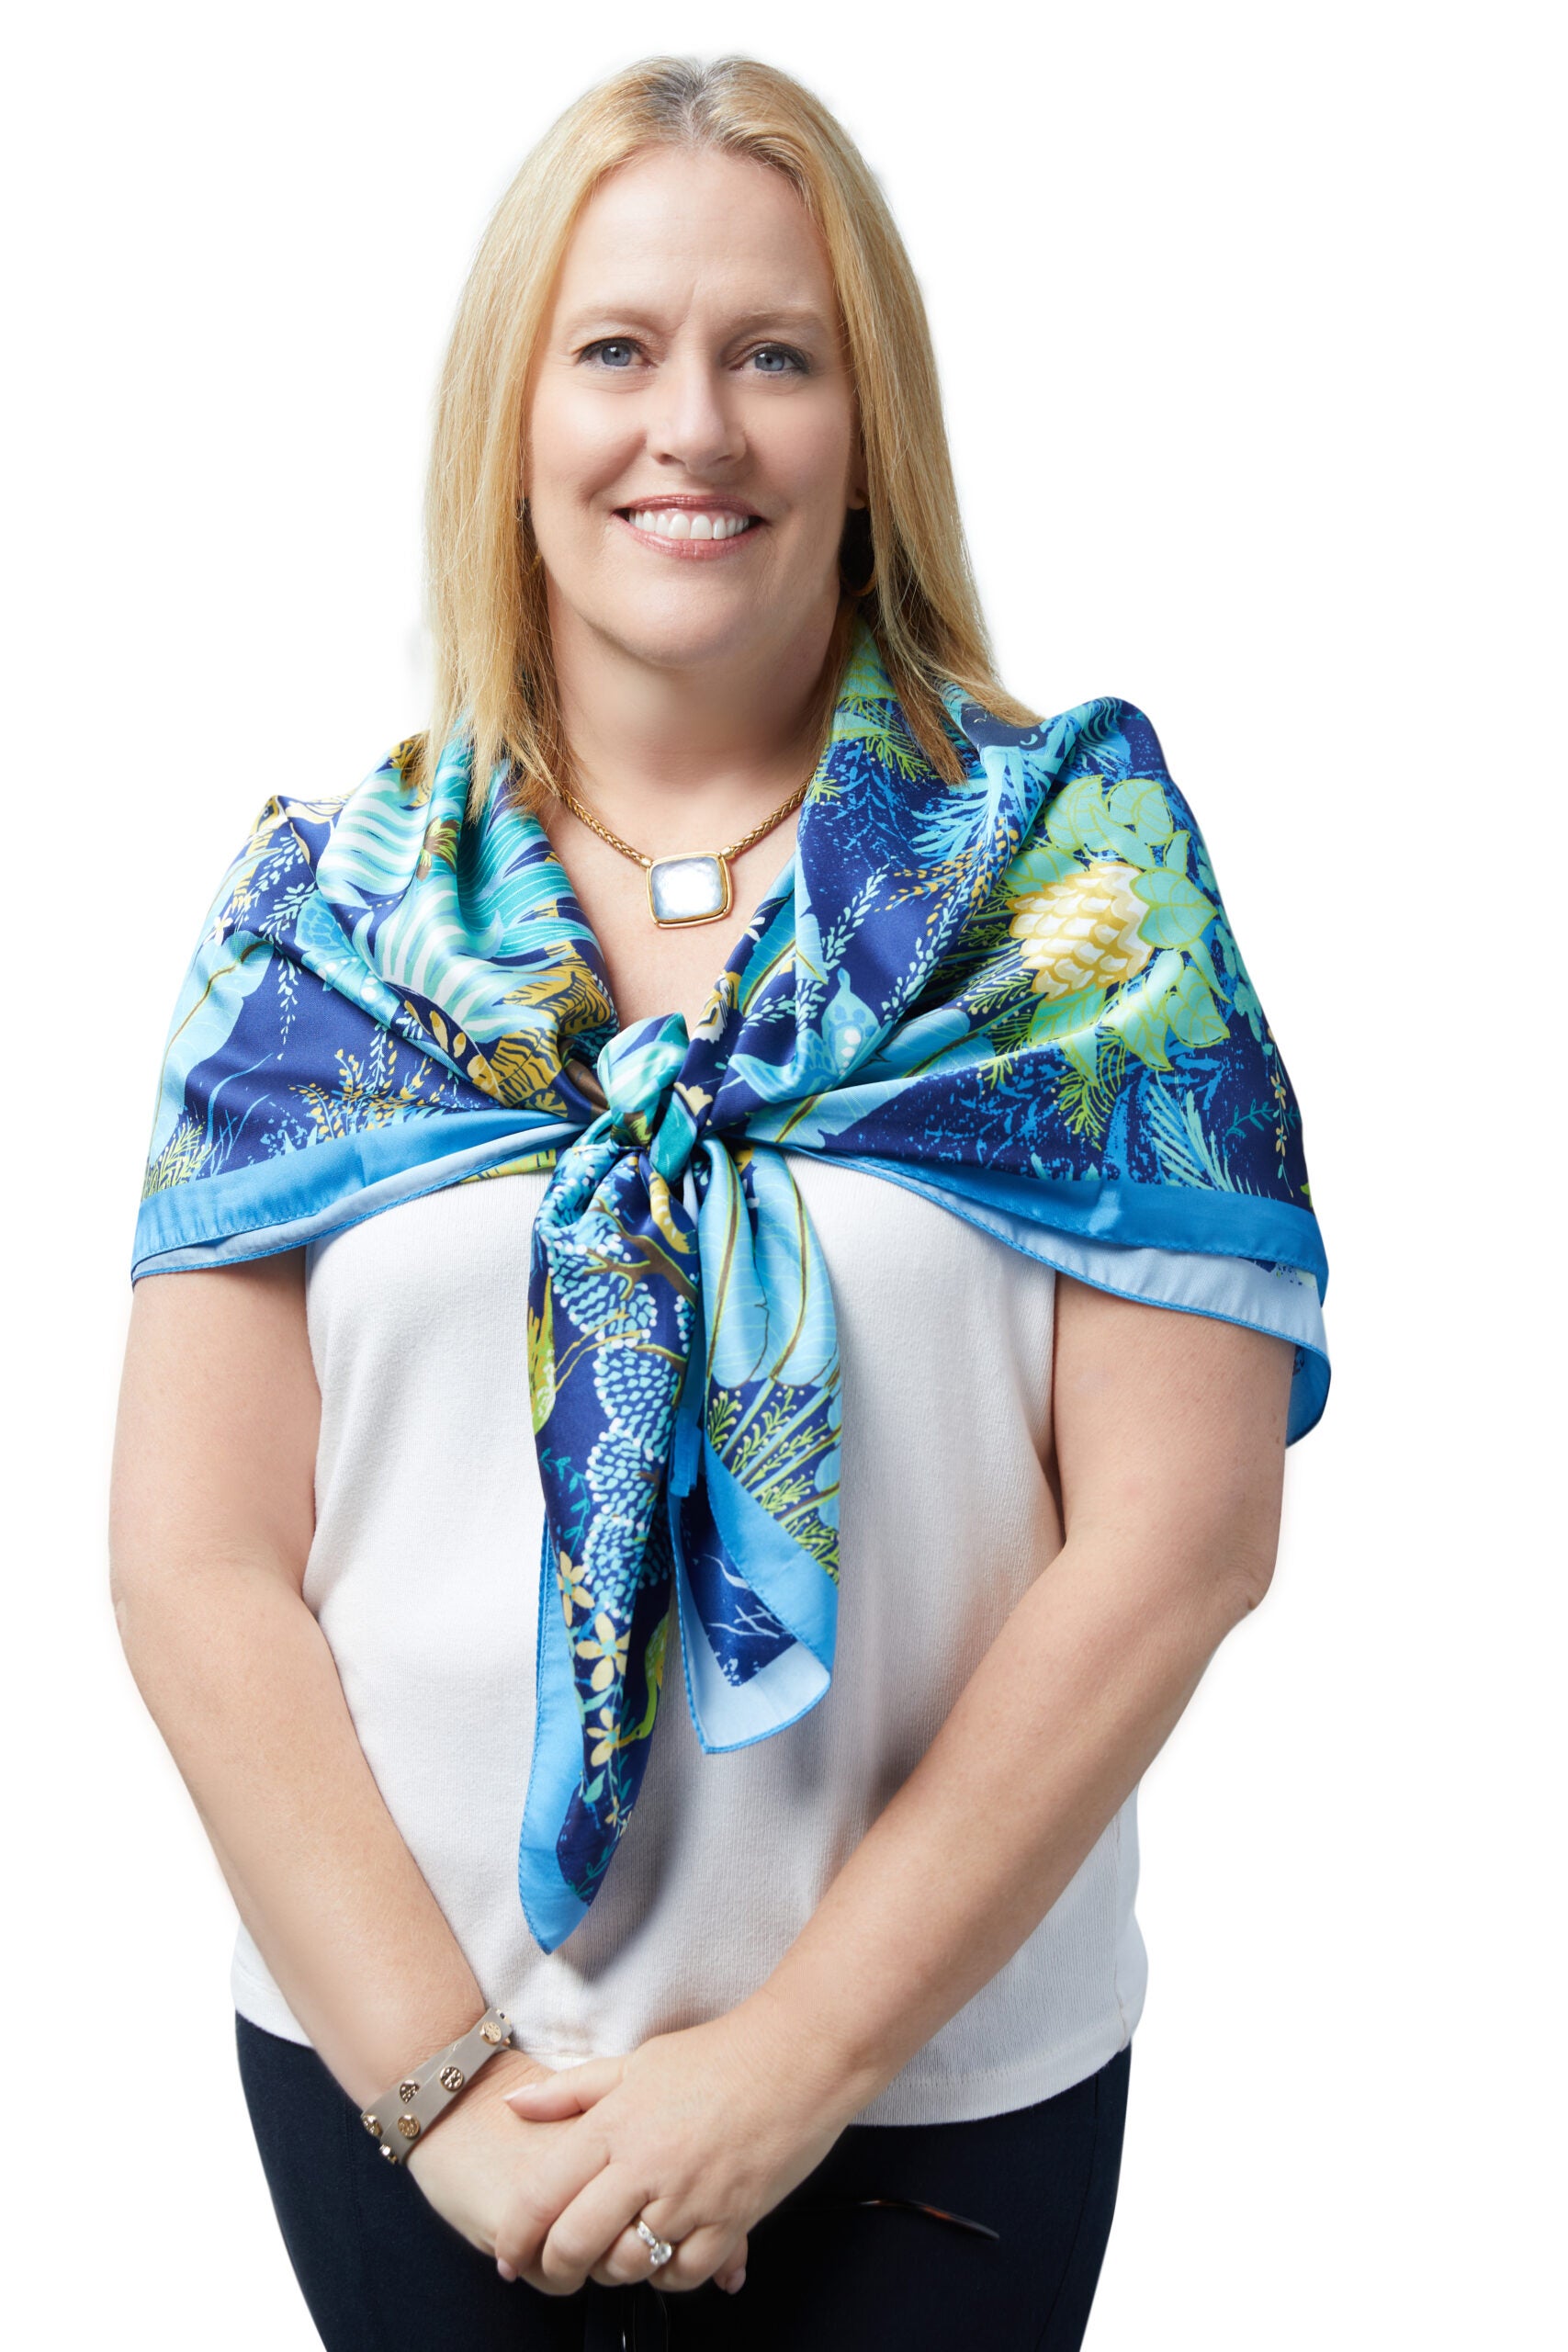 Pauline Bennett wearing blue shawl and standing in front of white background